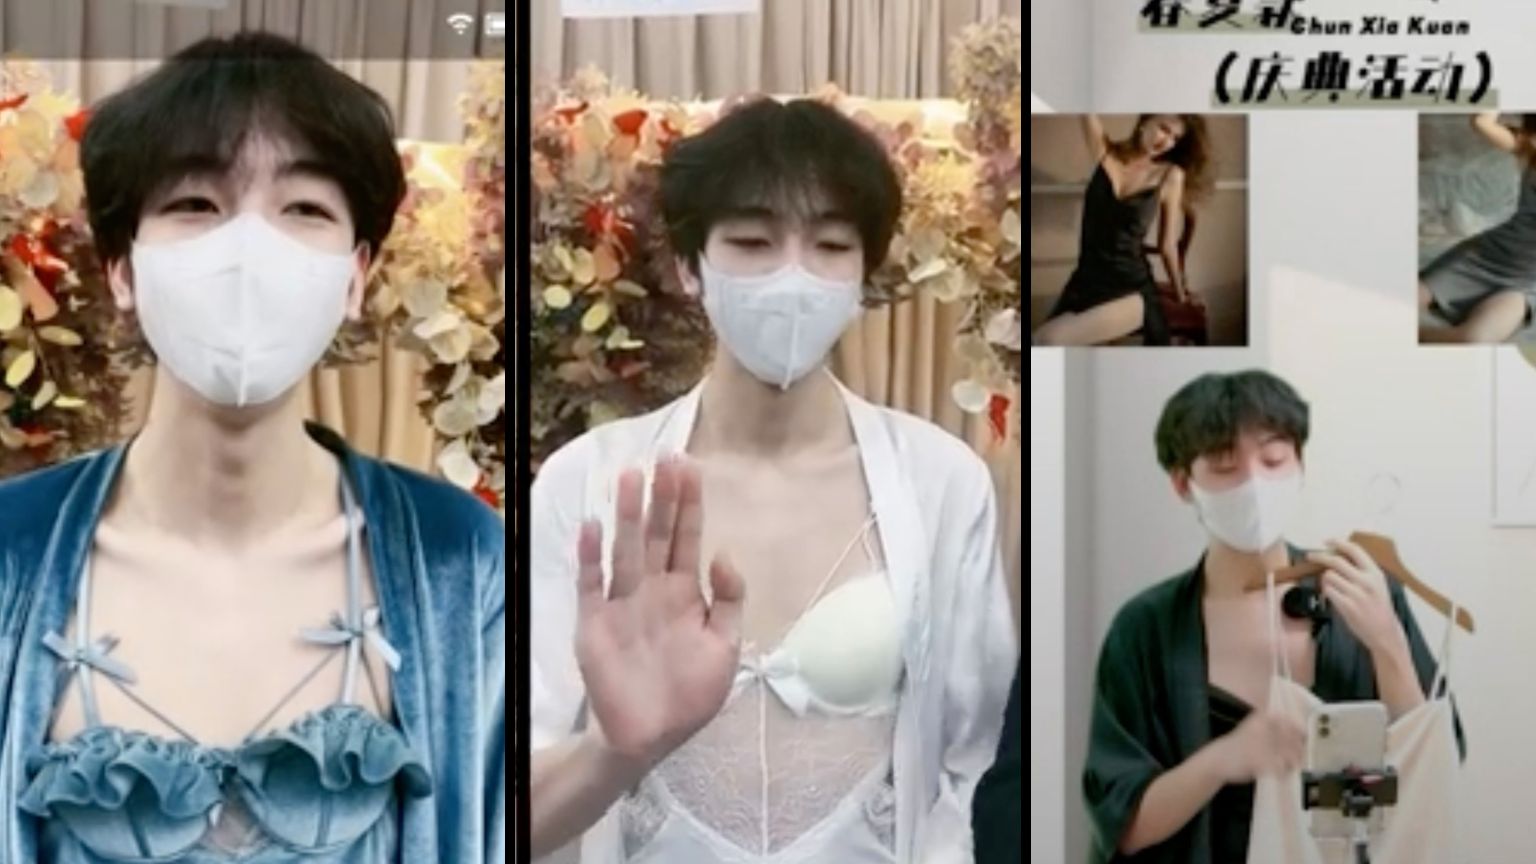 In China, men are modeling lingerie after ban on women streamers